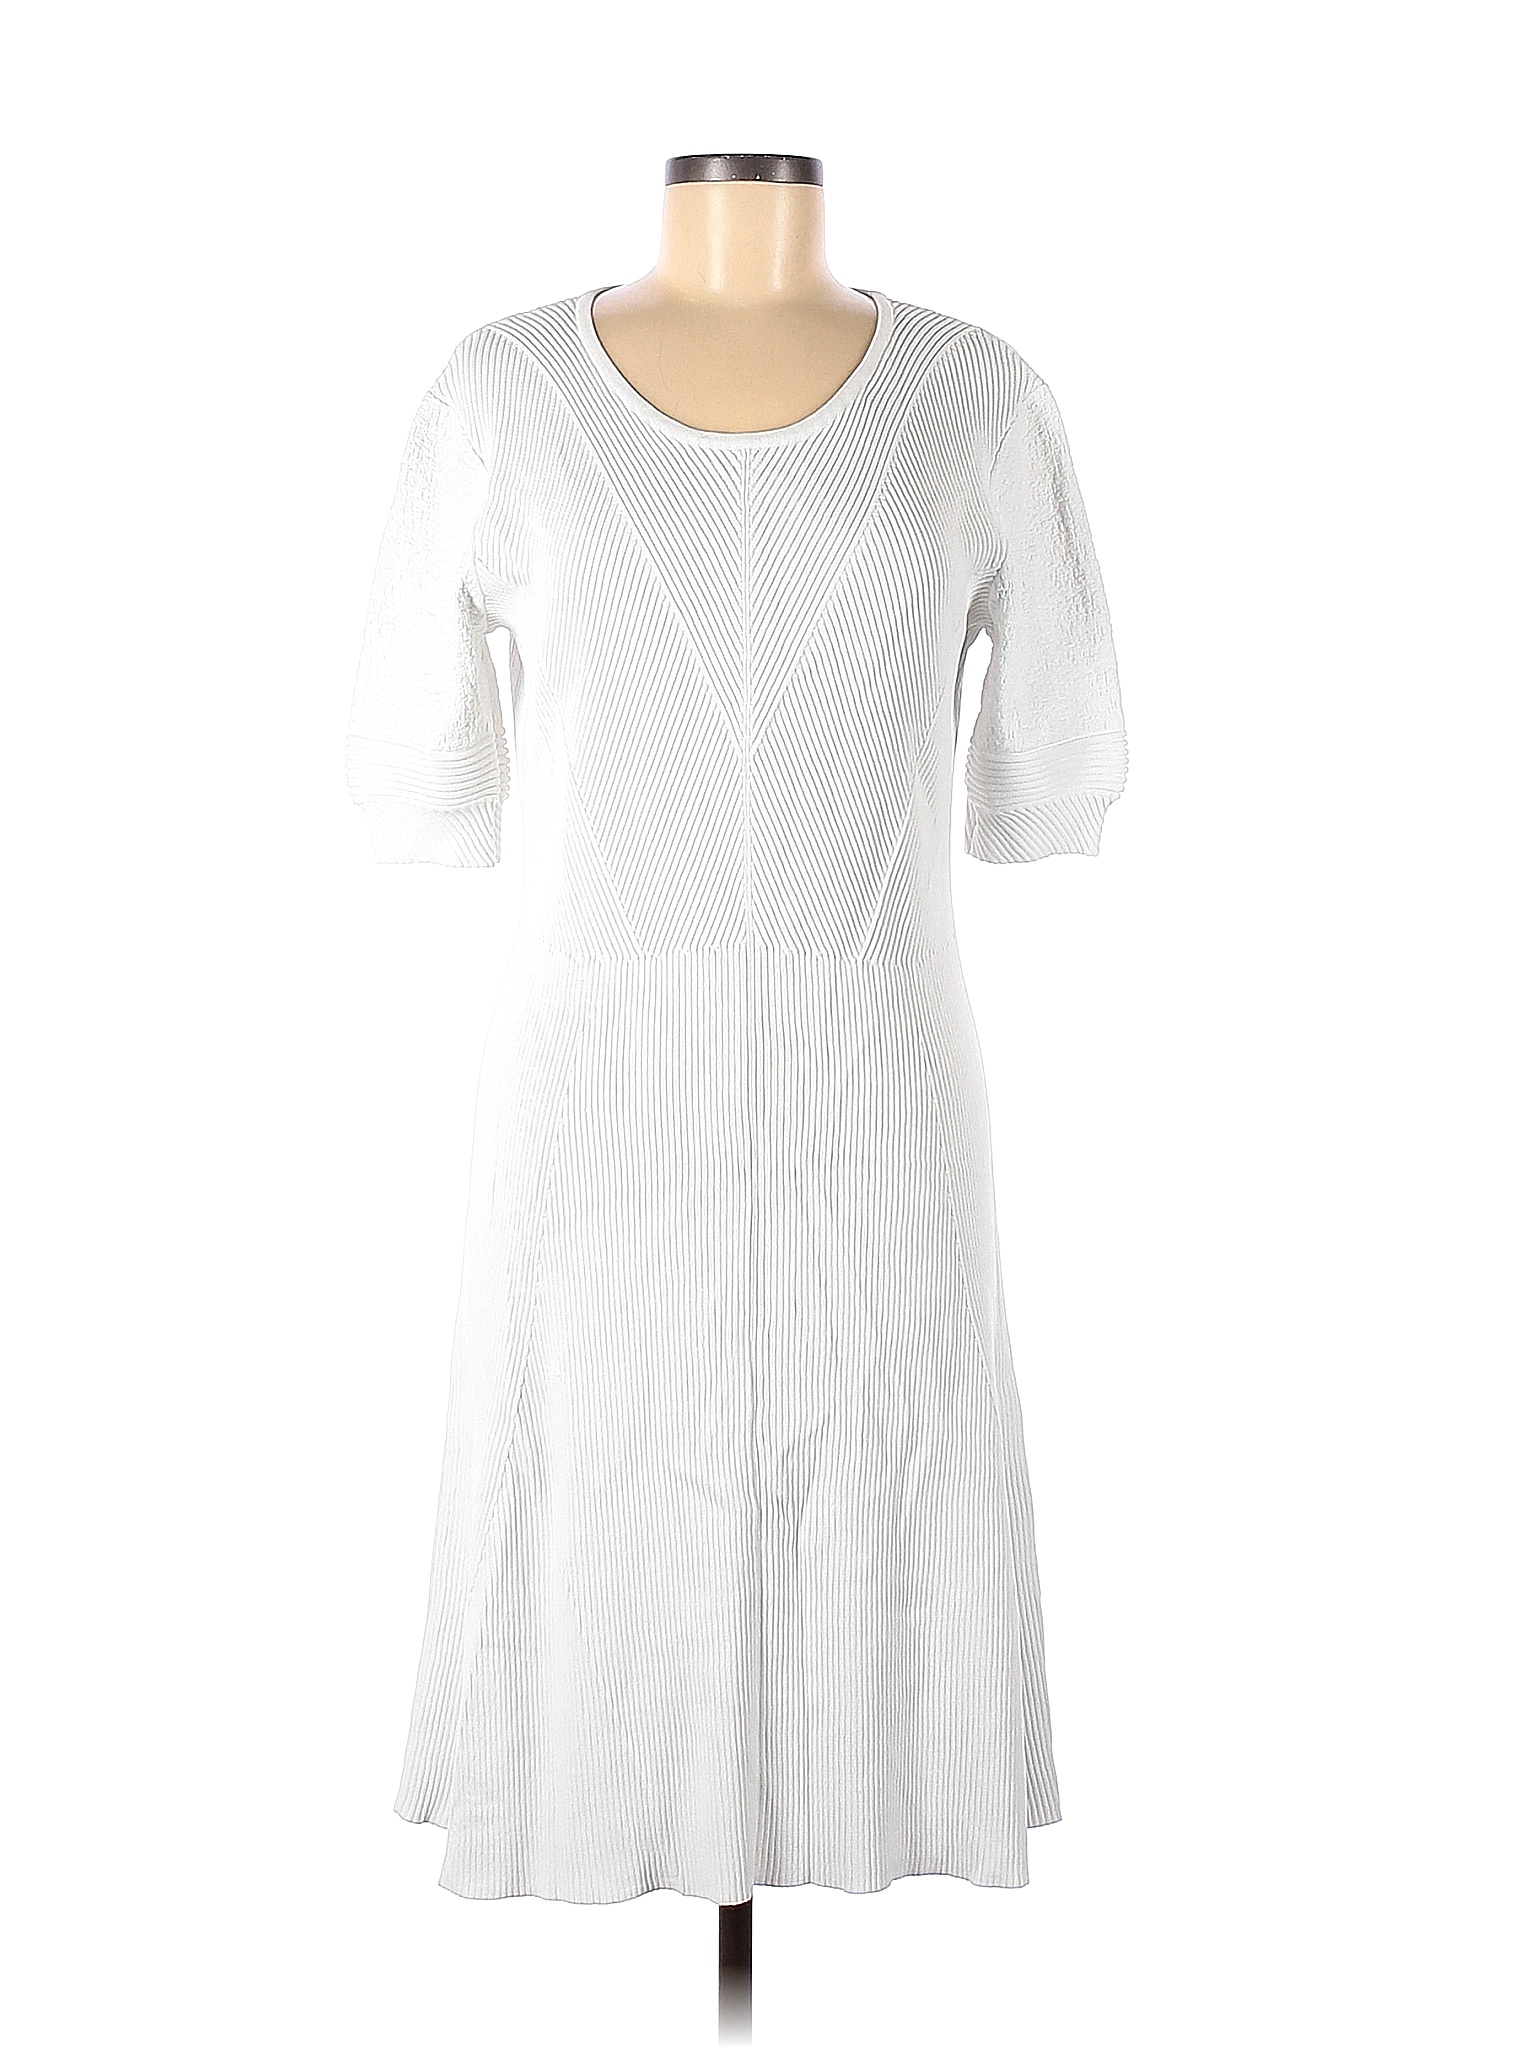 Slate & Willow Solid White White Knit Dress Size L - 77% off | thredUP